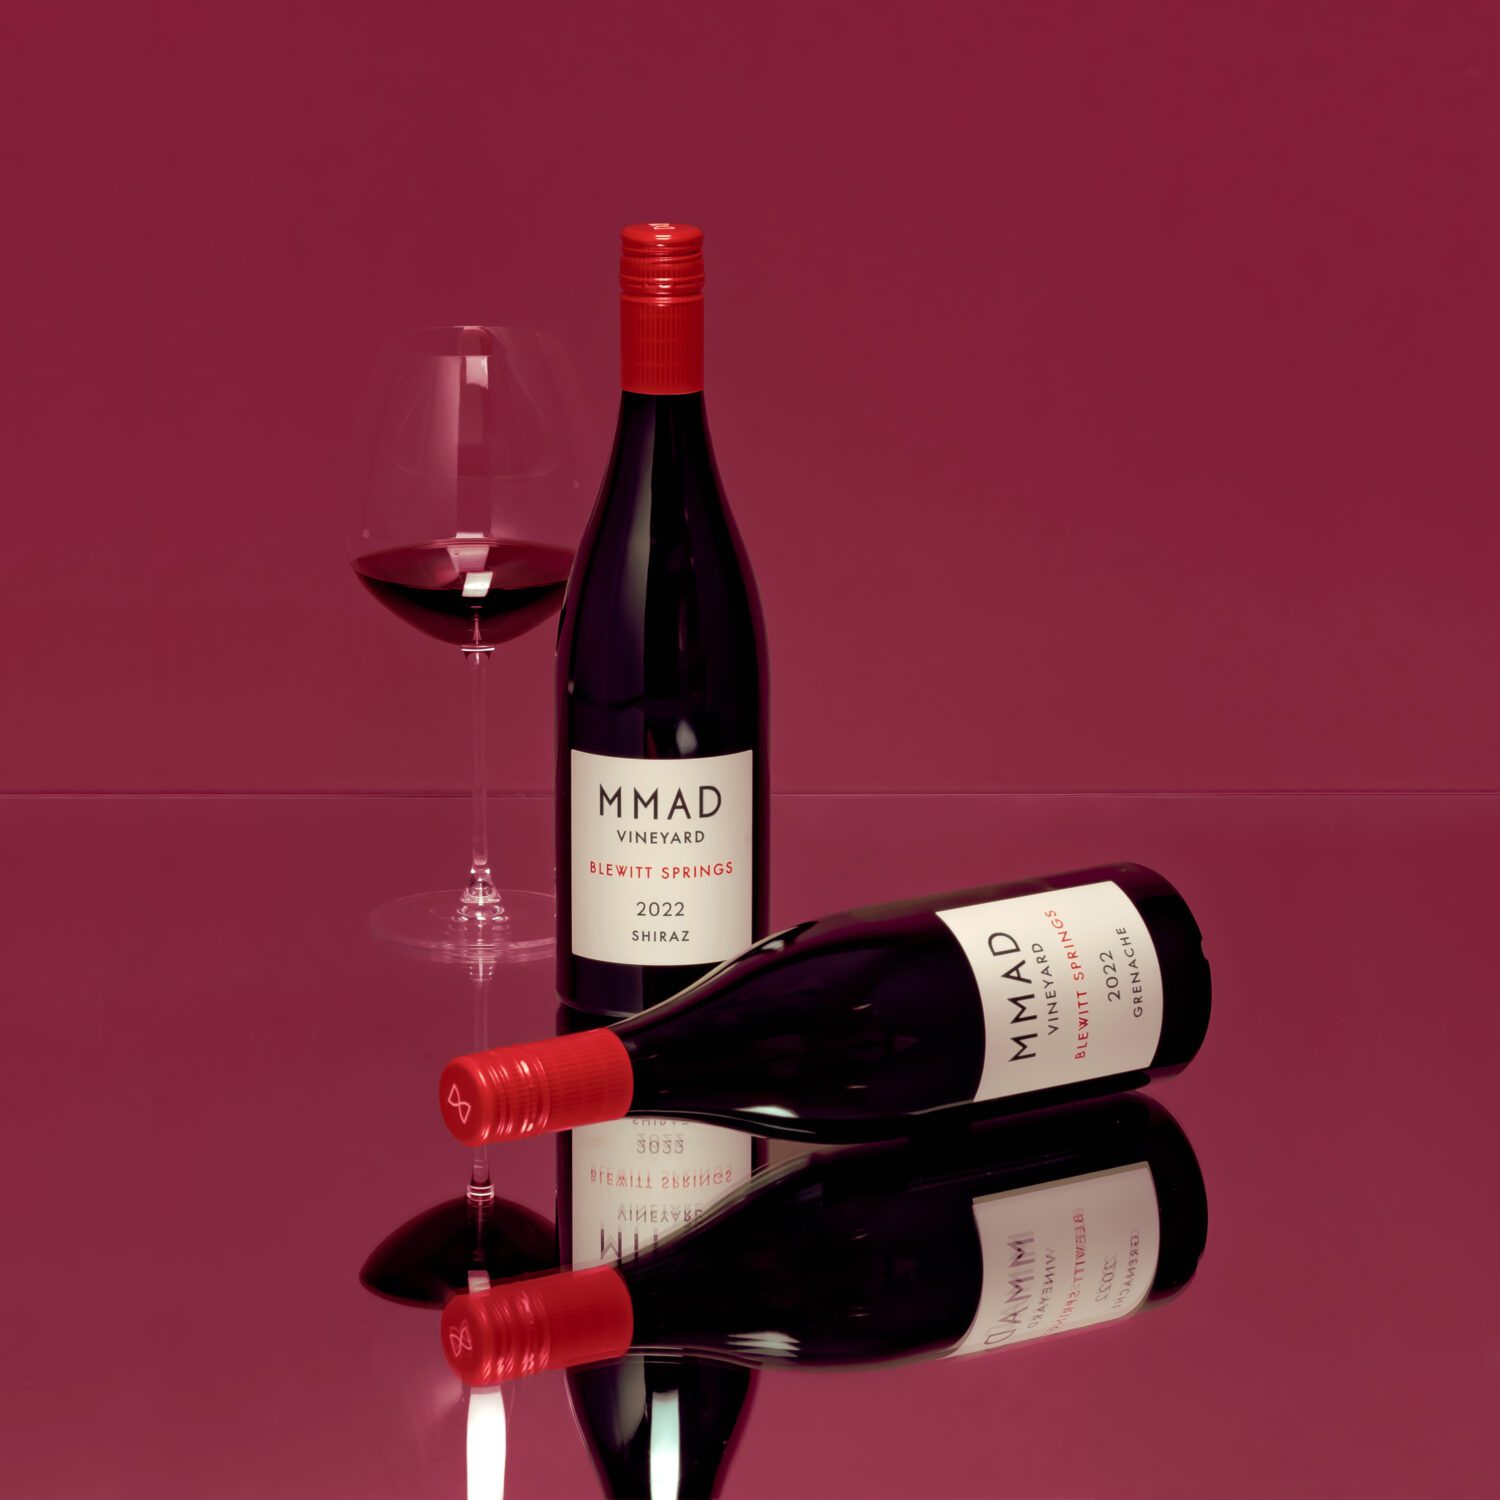 Two bottles and a glass of wine to show the MMAD Autumn Allocation